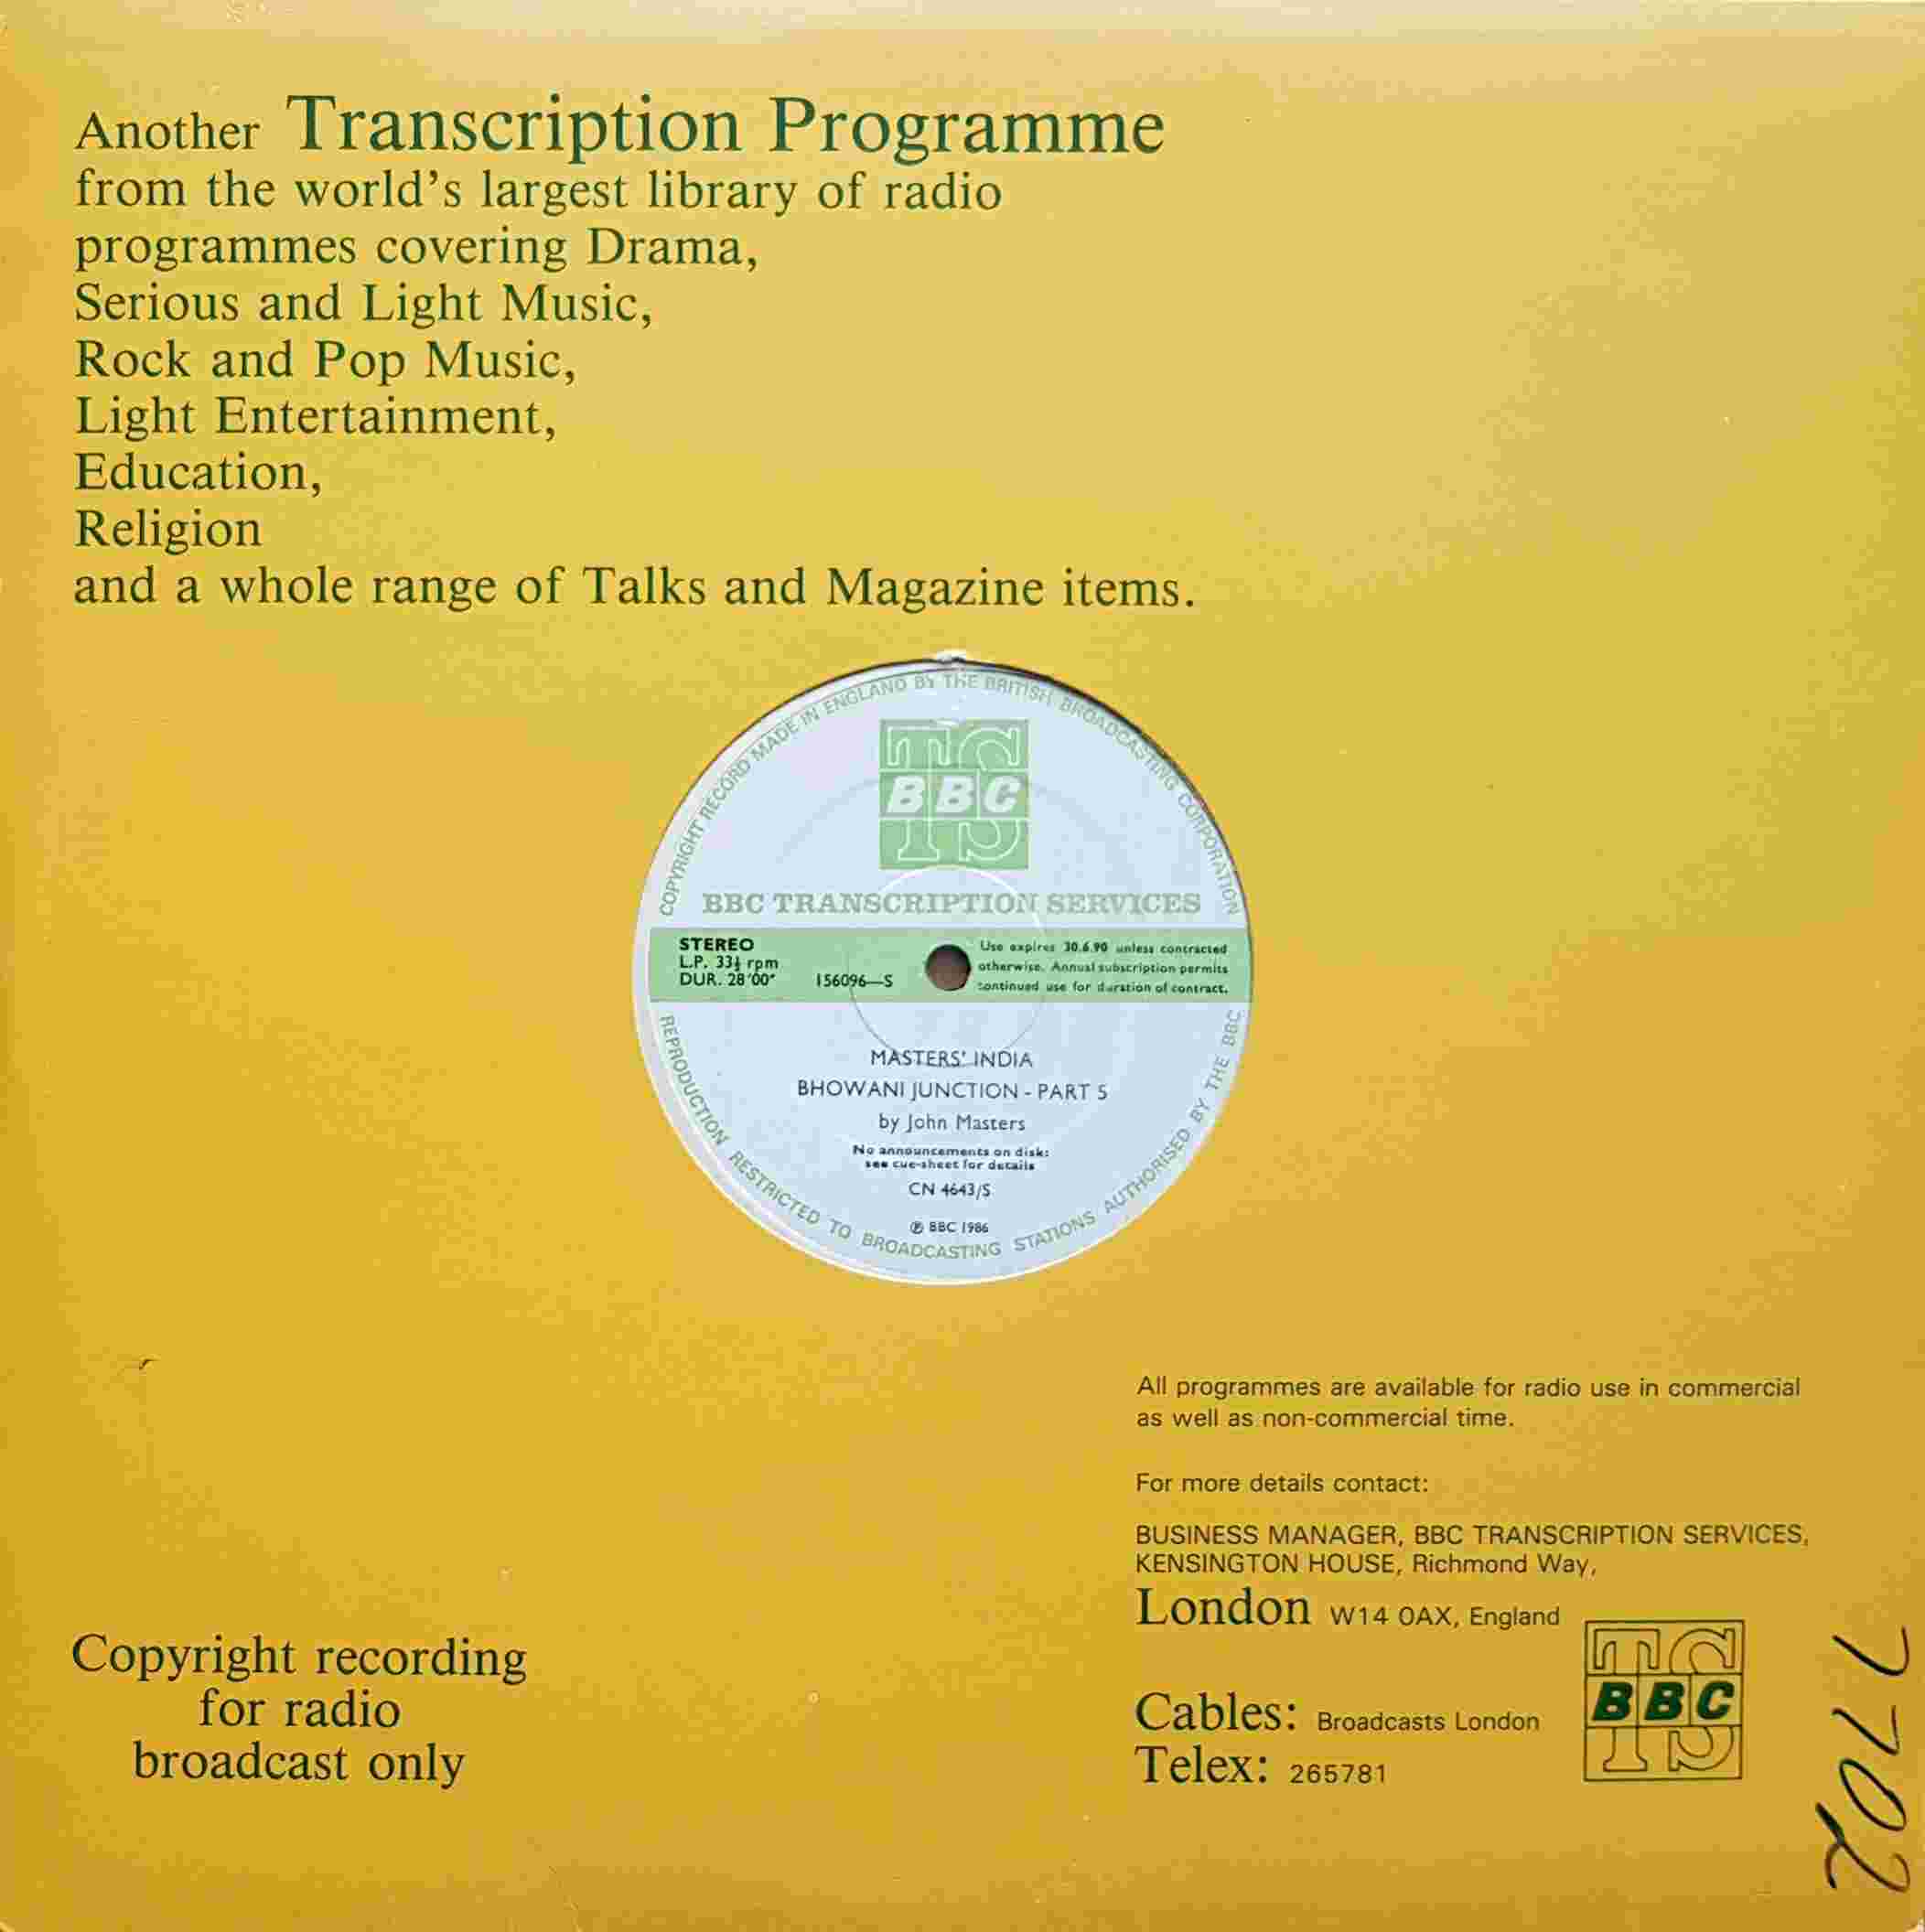 Picture of CN 4643 S 3 Masters' India Bhowani Junction - Parts 5 & 6 by artist John Masters from the BBC records and Tapes library